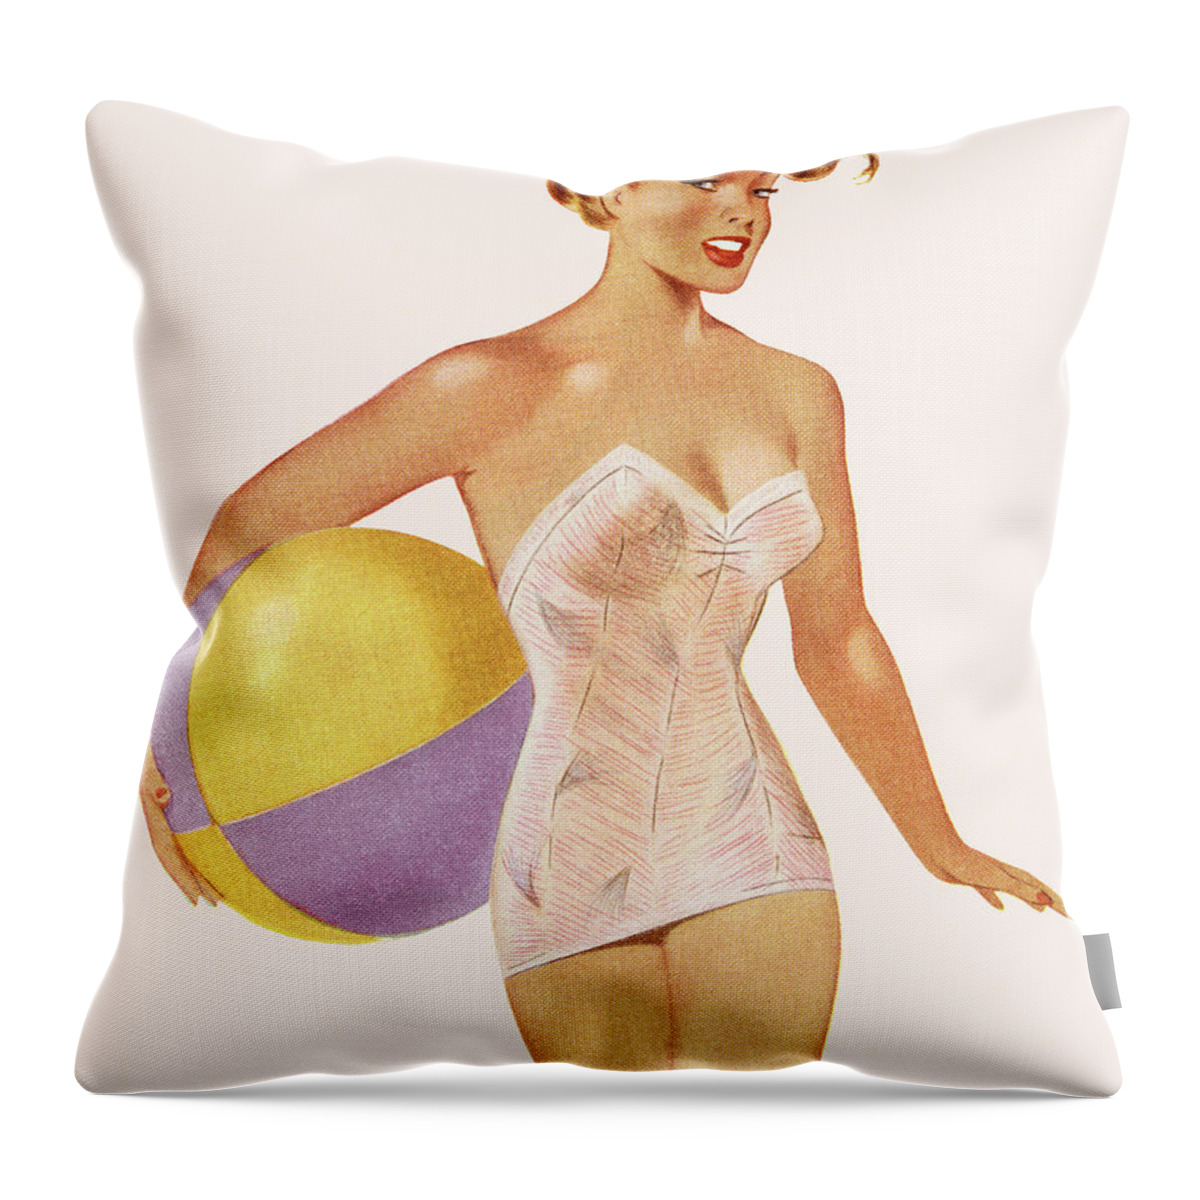 Adult Throw Pillow featuring the drawing Woman in Bathing Suit Holding a Beach Ball by CSA Images